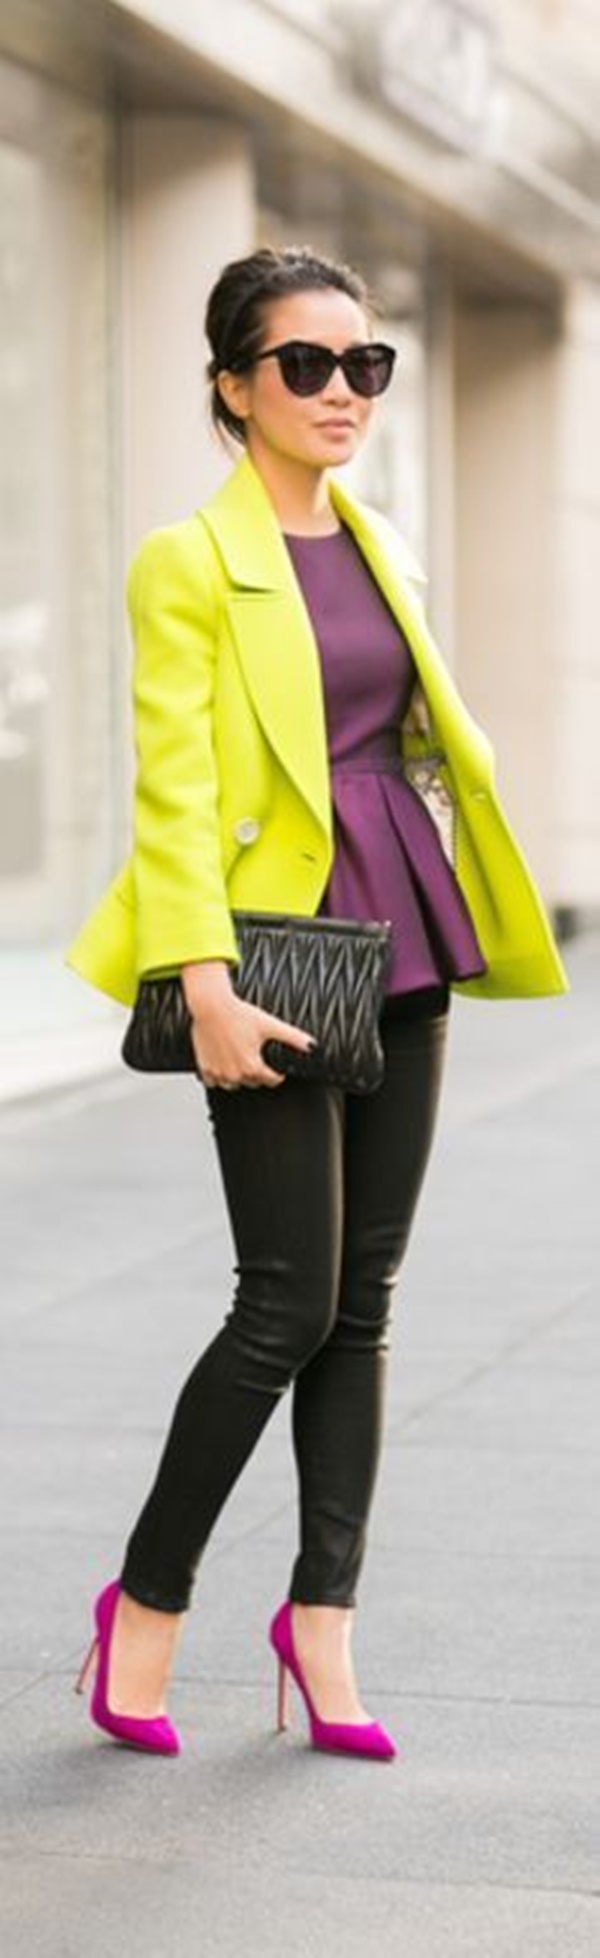 lime green leather pants